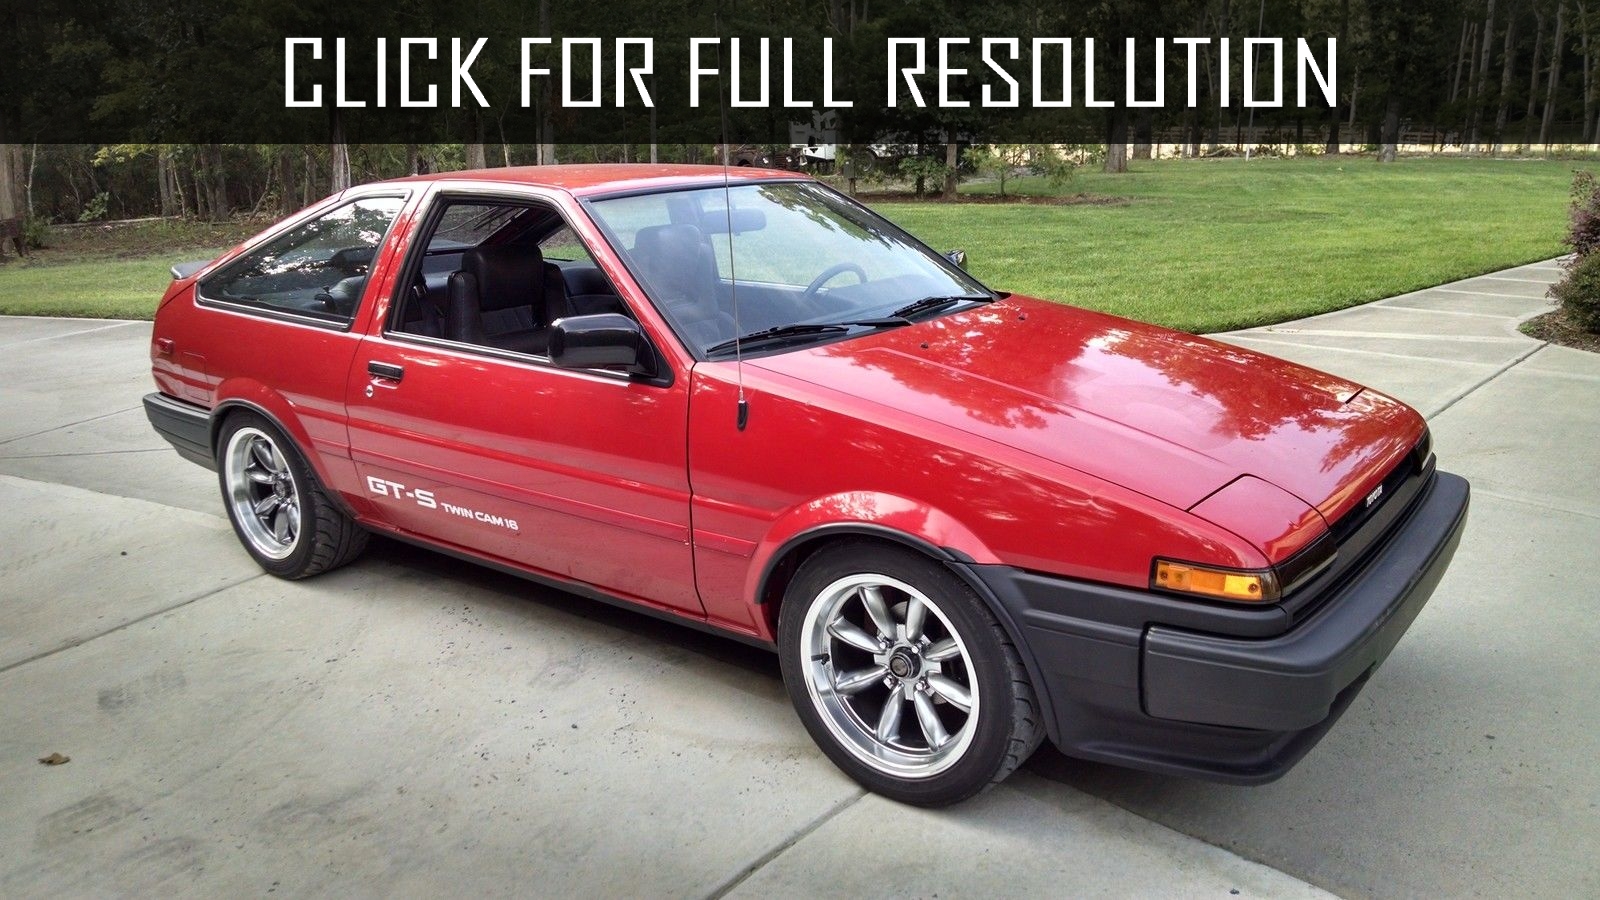 1987 Toyota Corolla Gts Best Image Gallery 12 21 Share And Download